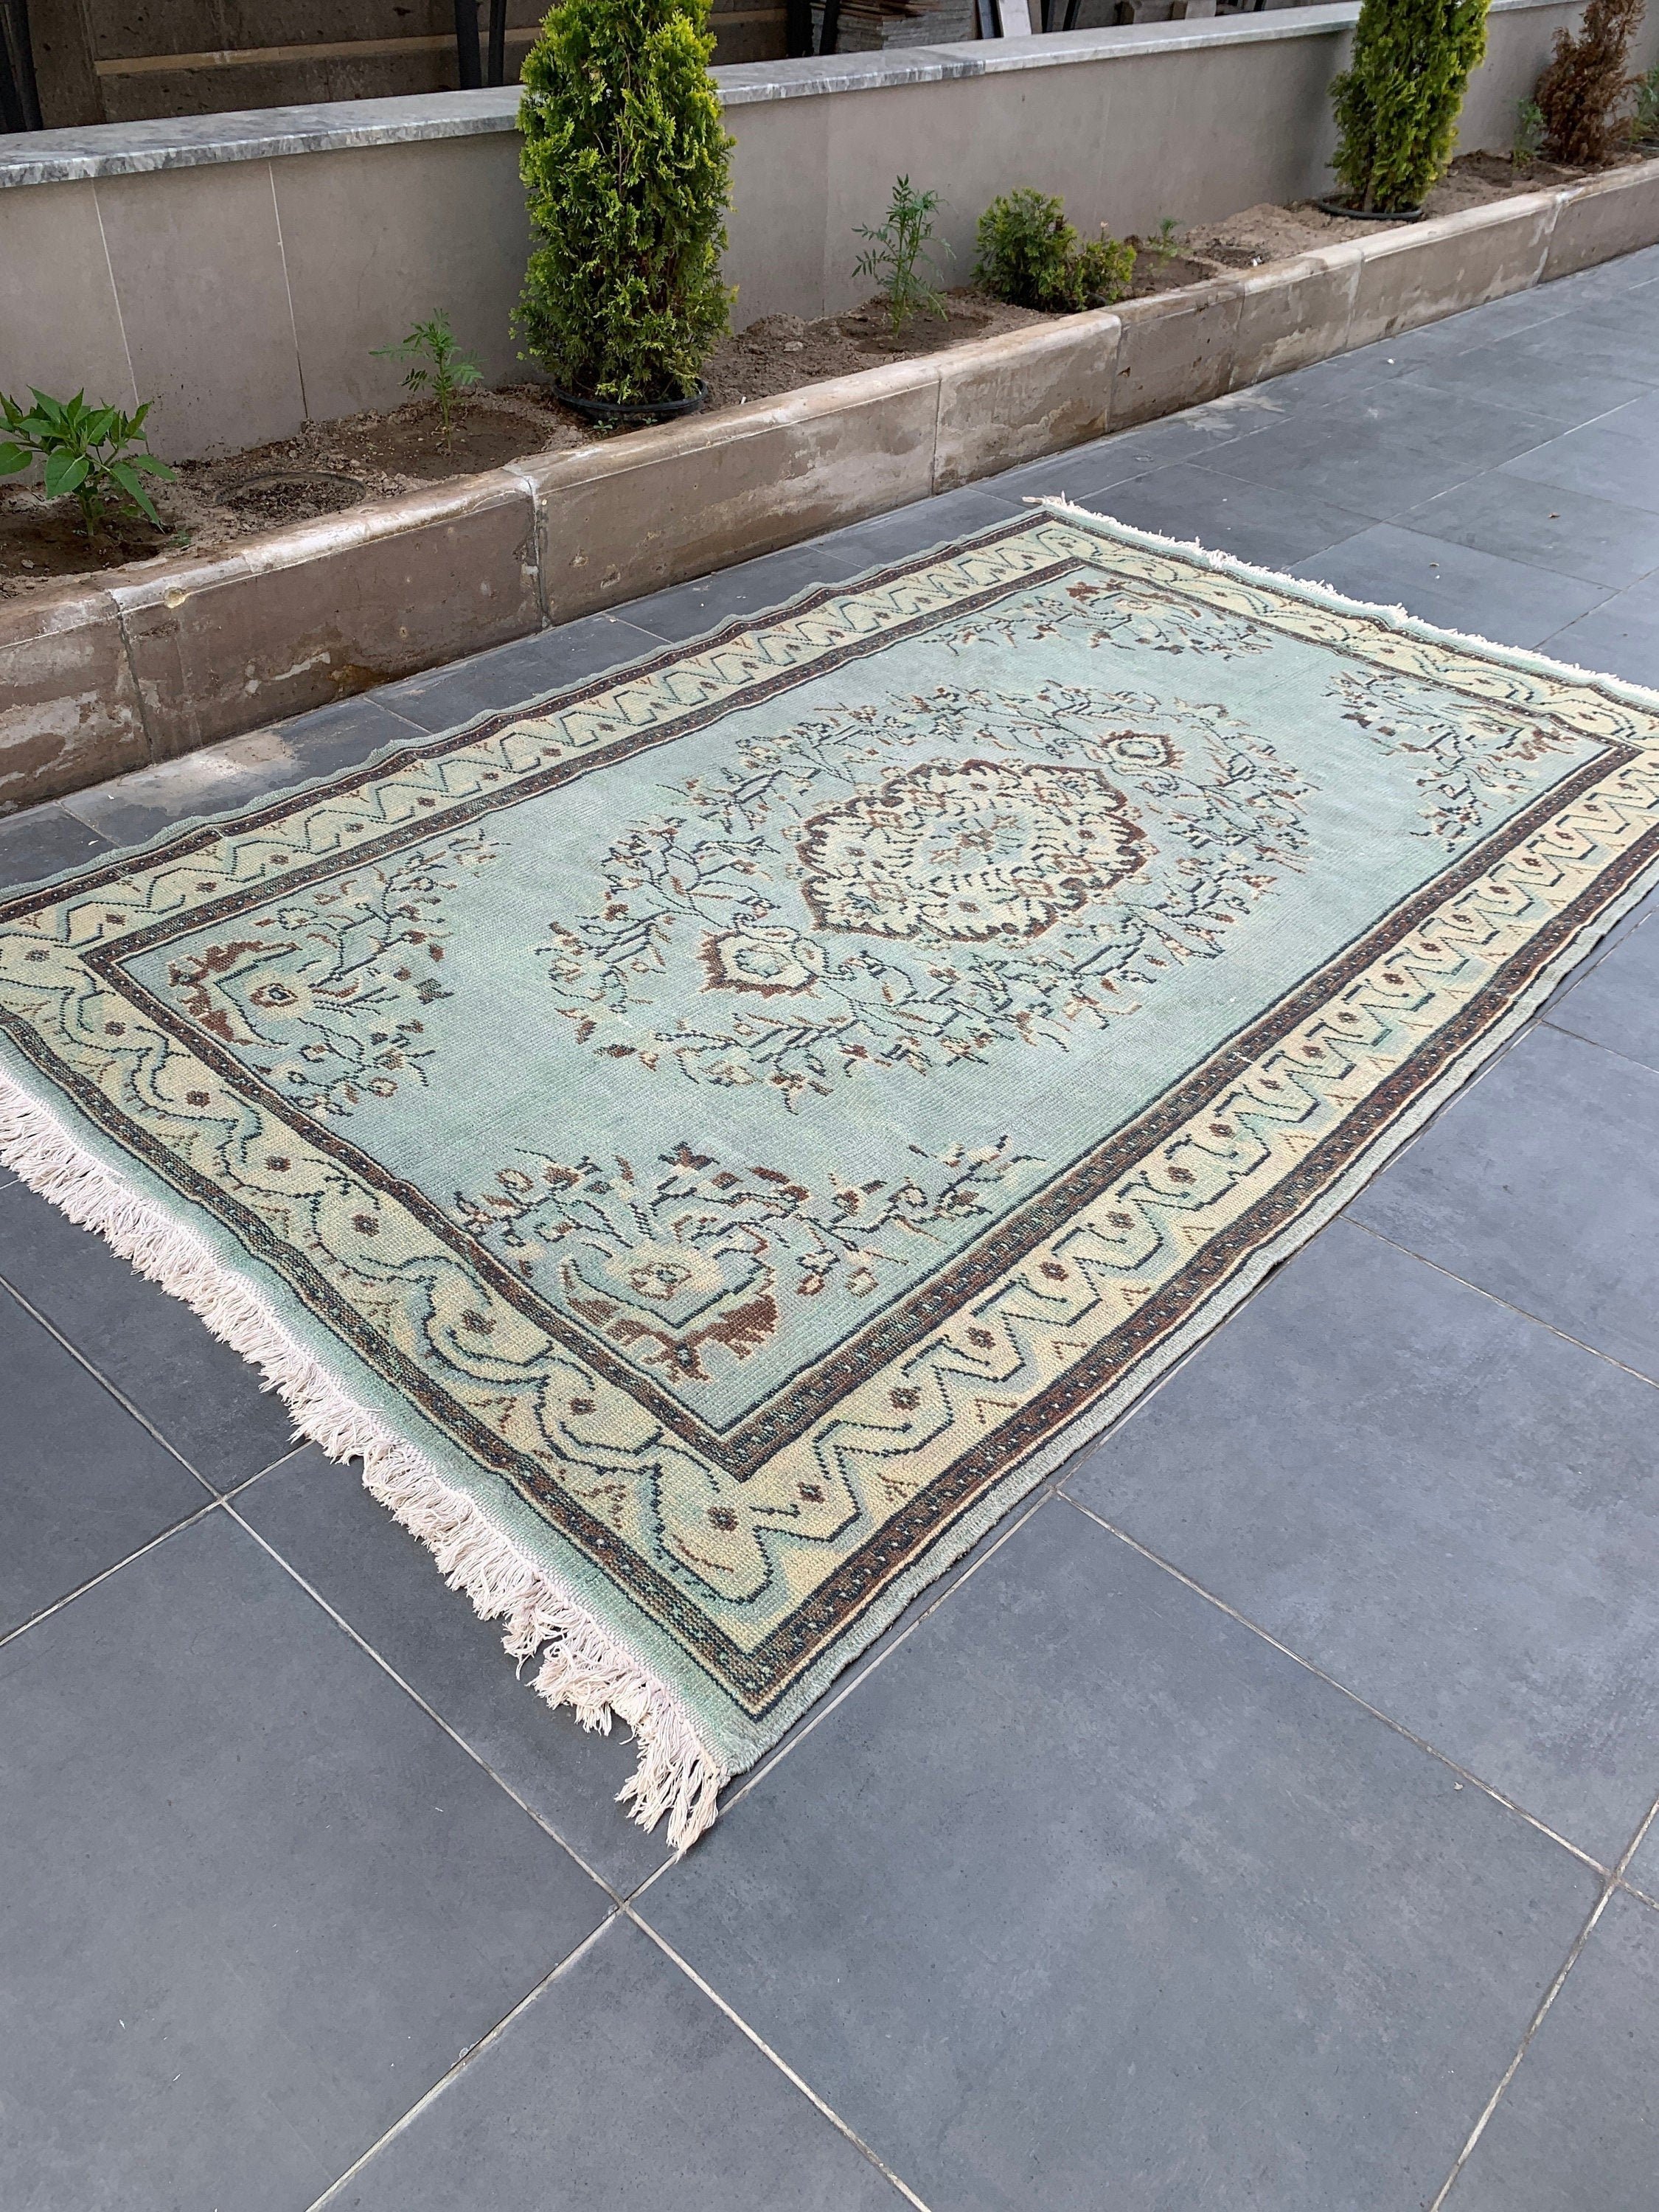 Green Antique Rug, Vintage Rugs, 5.9x9.5 ft Large Rugs, Eclectic Rugs, Turkish Rug, Cool Rug, Salon Rugs, Dining Room Rugs